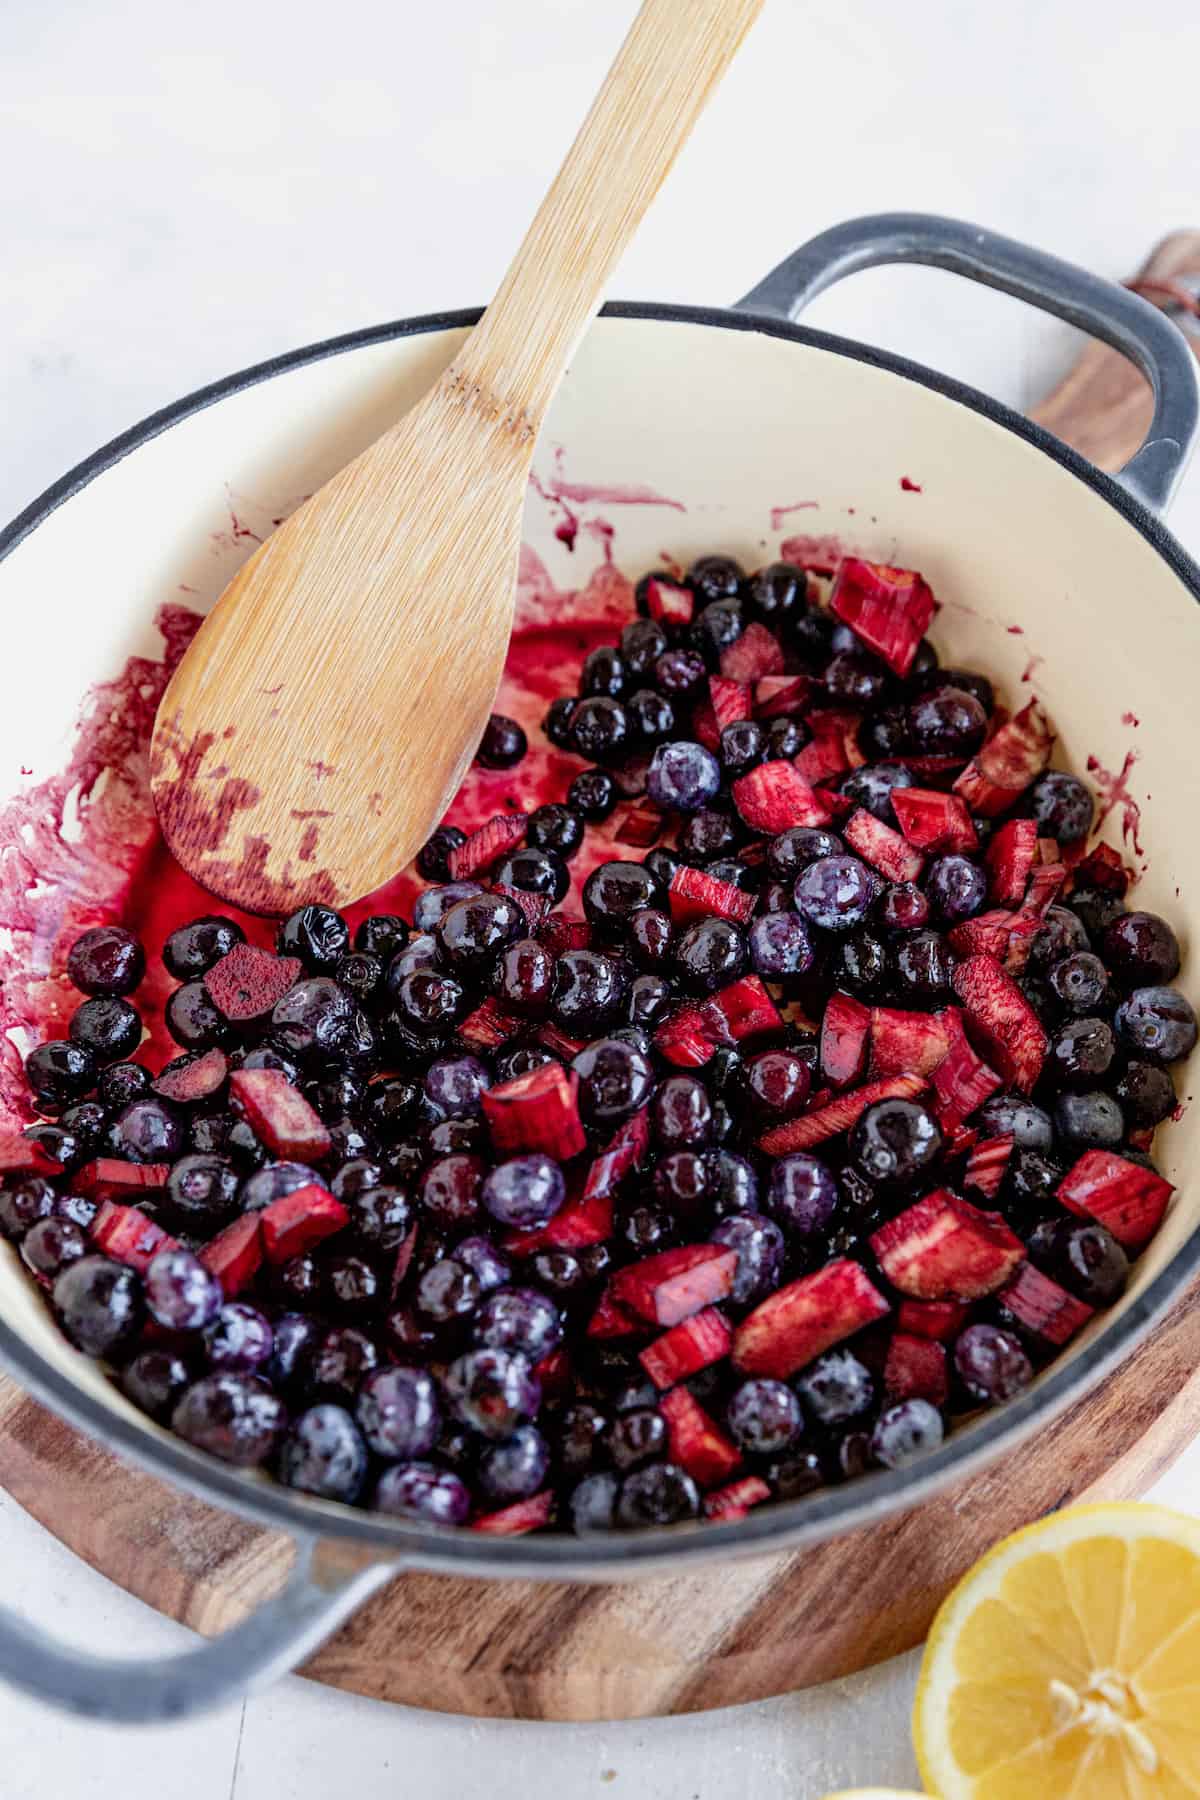 The Filling for Blueberry Rhubarb Cobbler in a Skillet Being Mixed with a Wooden Spoon